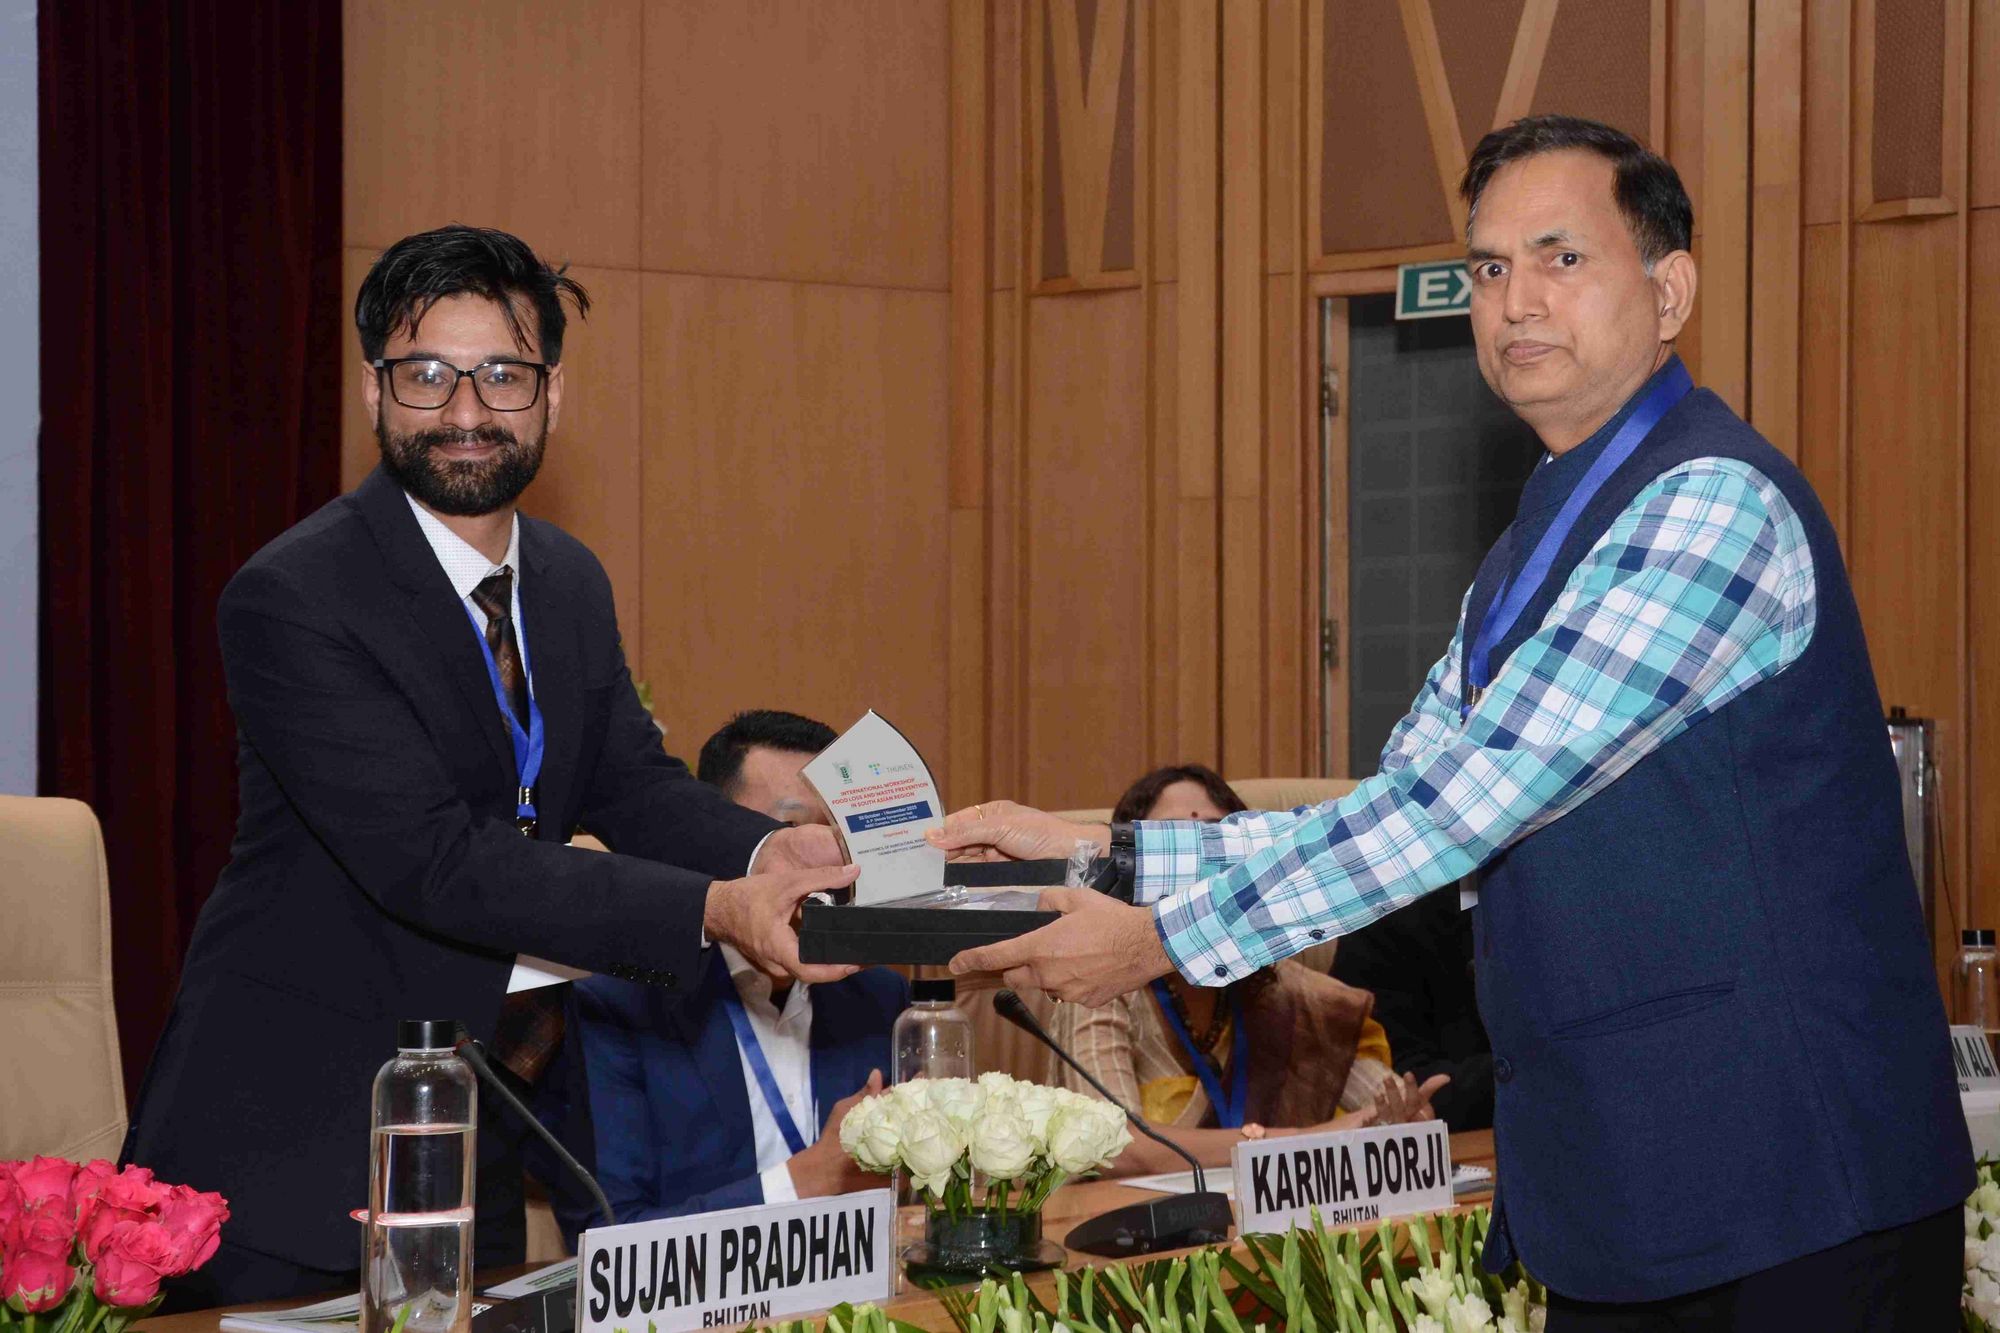 Mr. Sujan Pradhan, Chief Postproduction Officer from National Post Harvest Centre Bhutan, serving as co-chair receives his memento after the session by Dr K P Singh, Assistant Director General Indian Council of Agricultural Research.